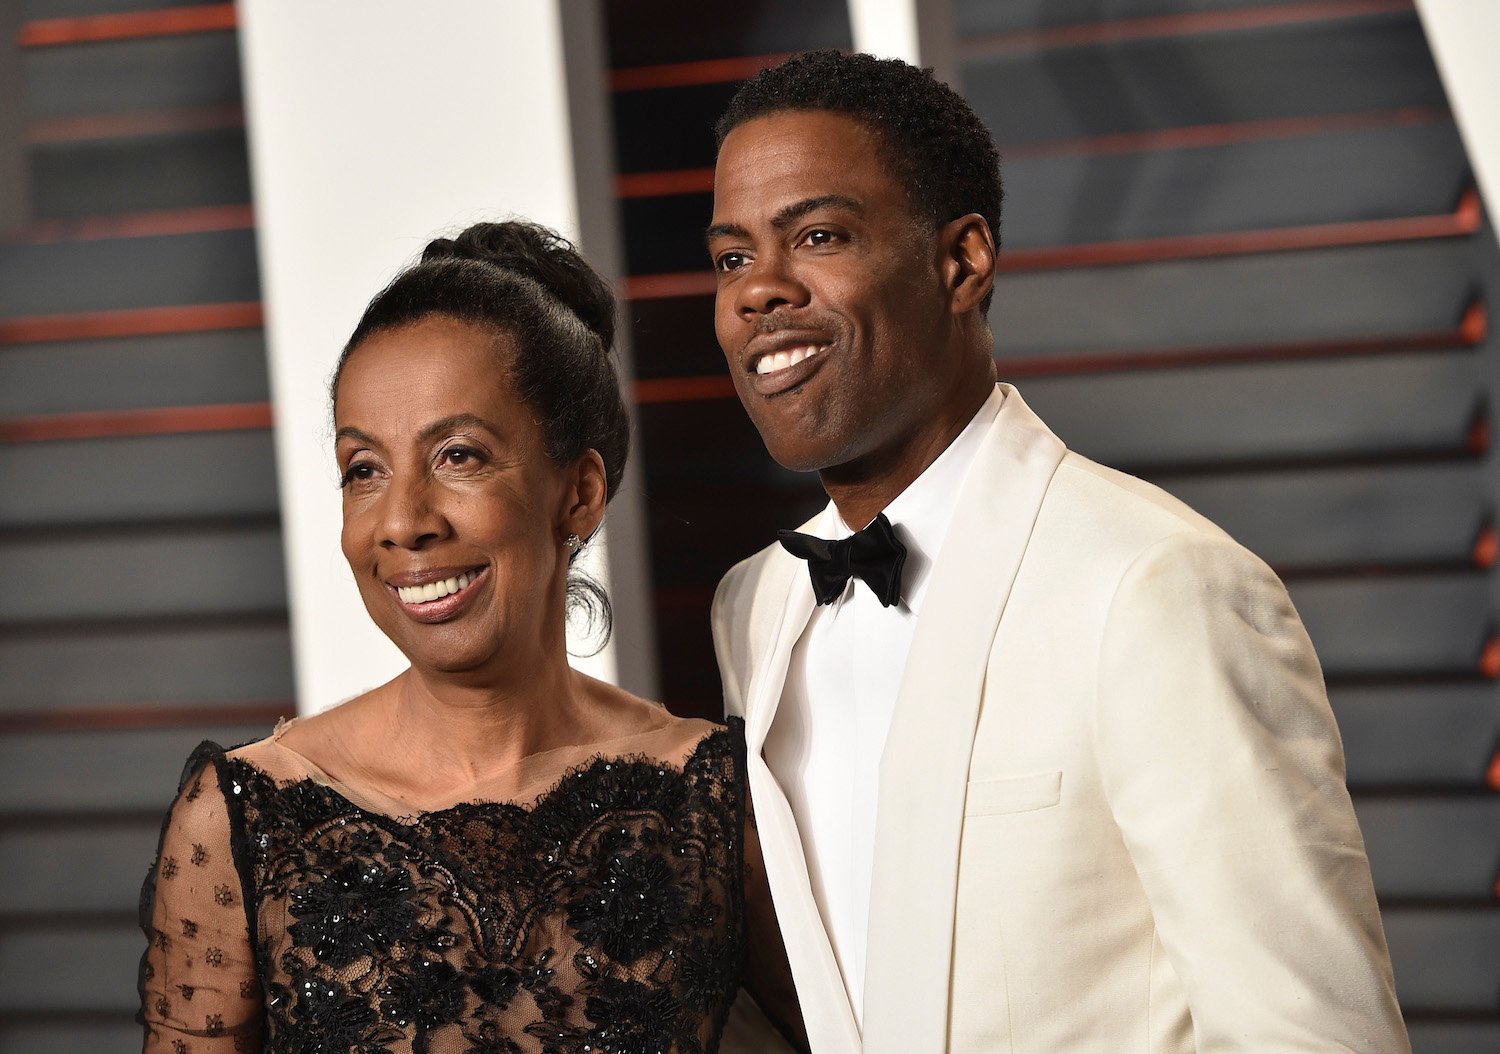 Chris Rock with his mother, Rosalie Rock, at a party in 2016